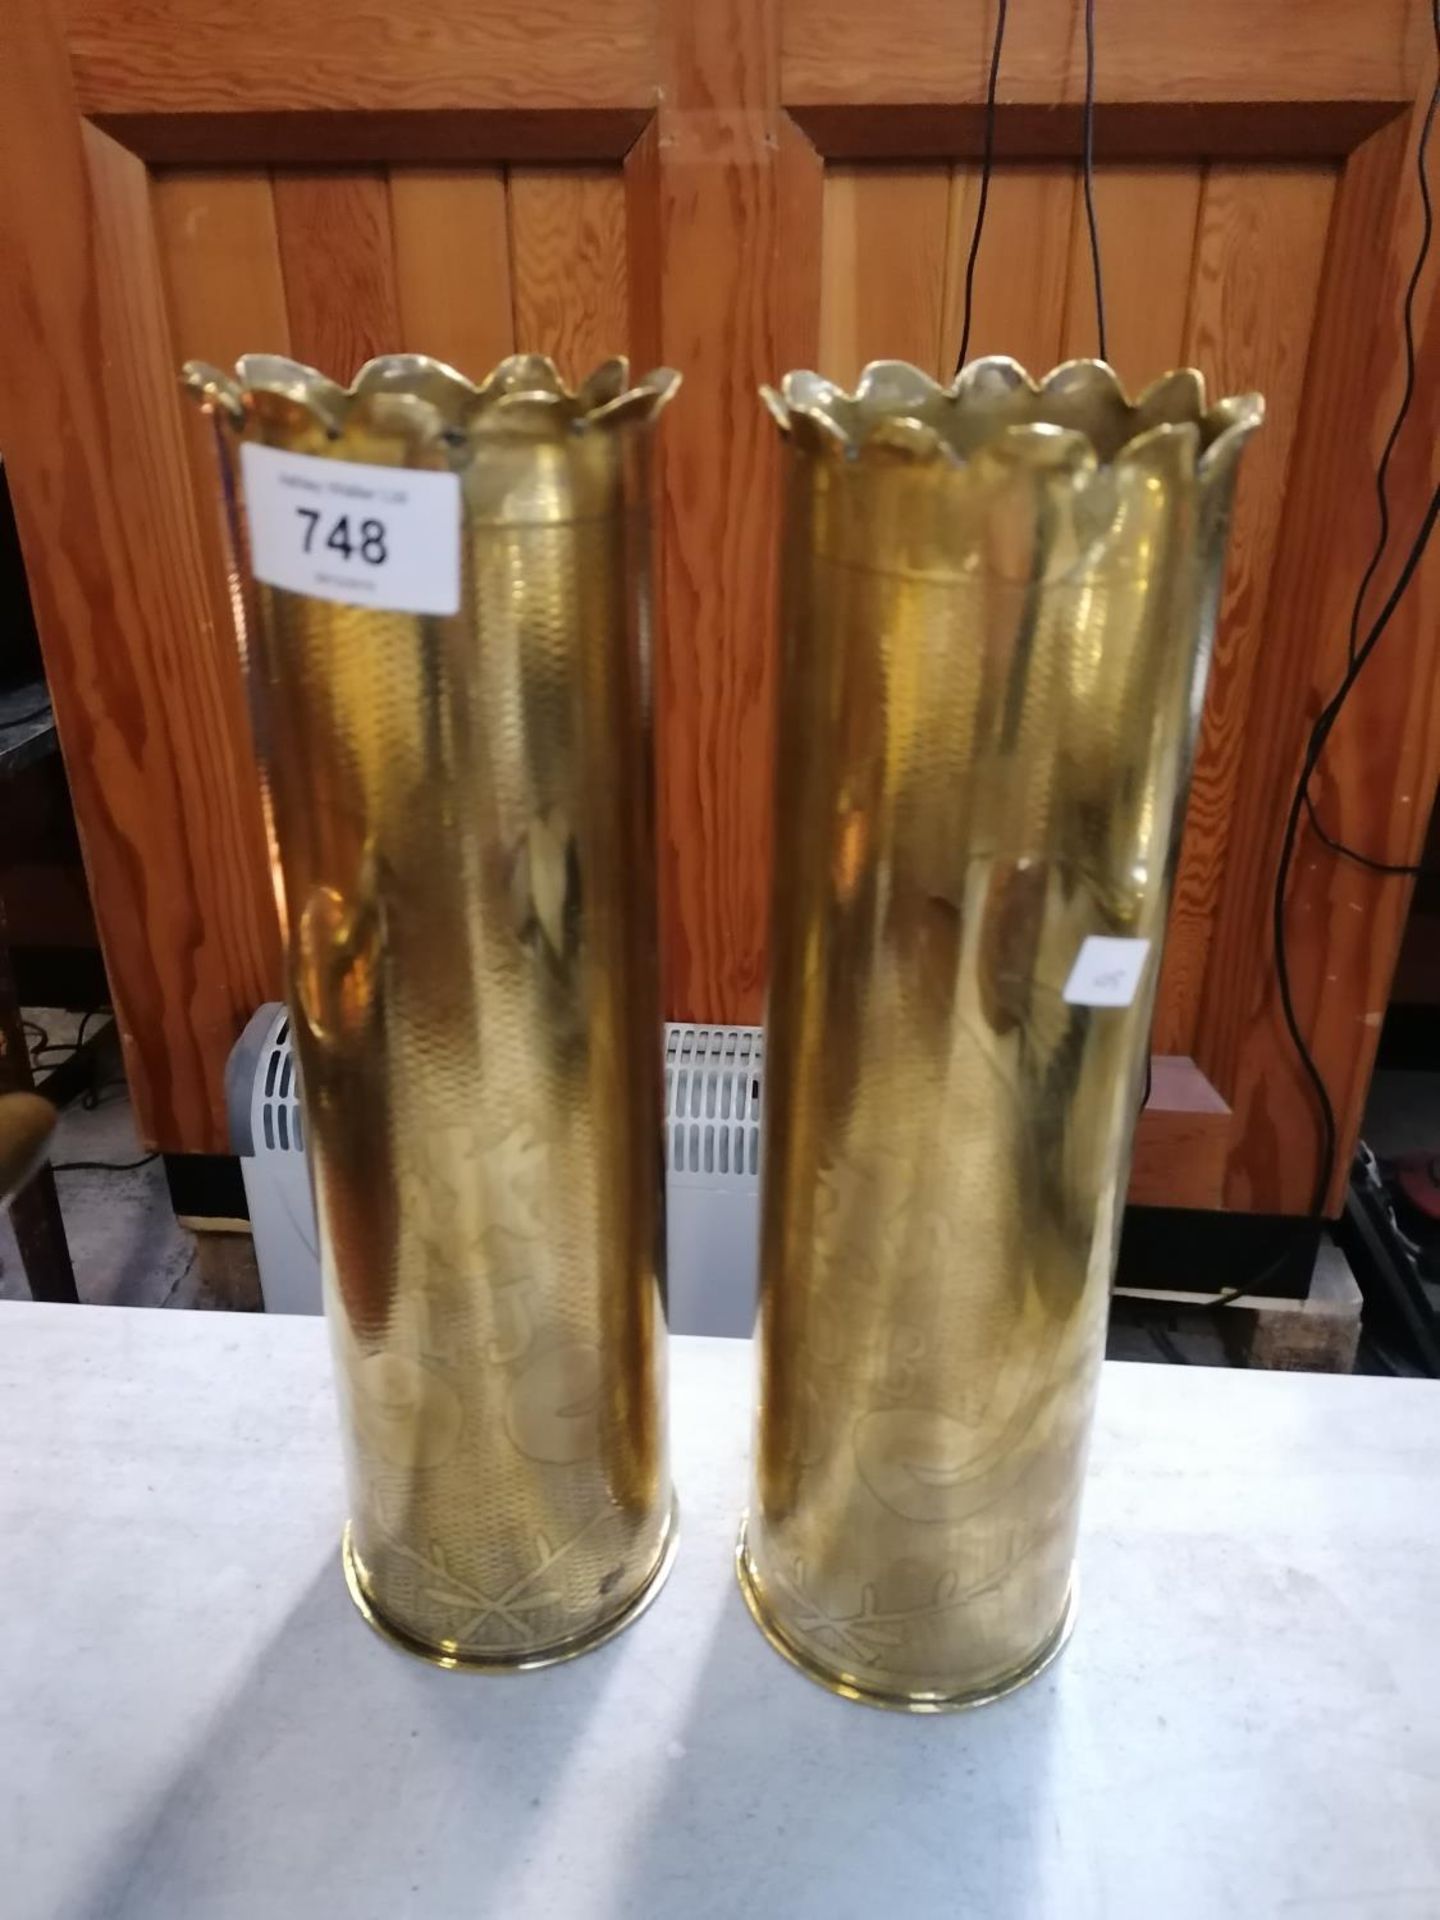 A PAIR OF VINTAGE BRASS TRENCH ART SHELLS